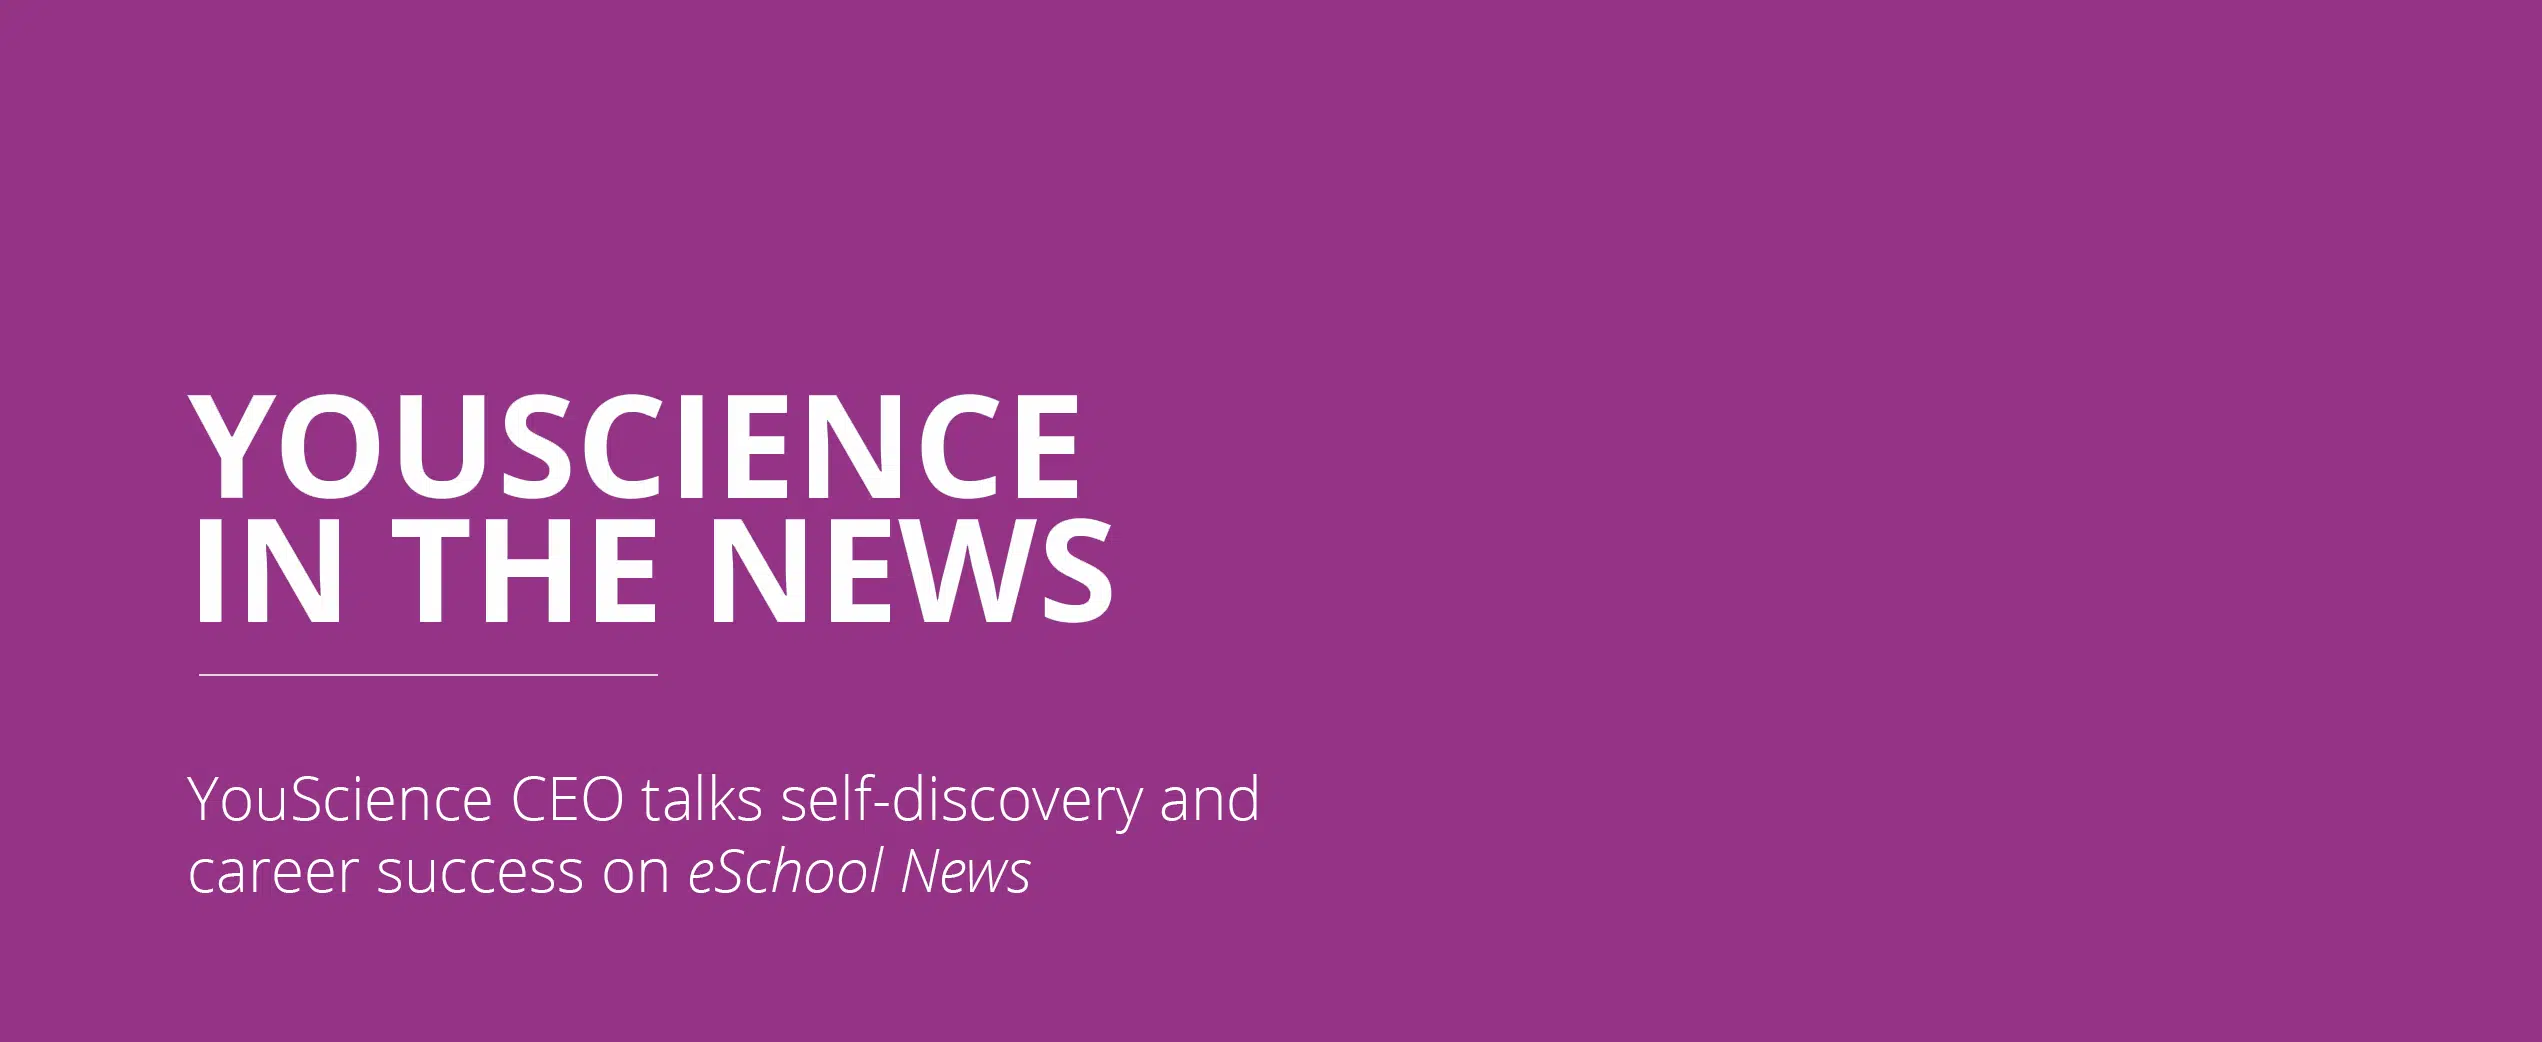 YouScience CEO talks self-discovery and career success on eSchool News